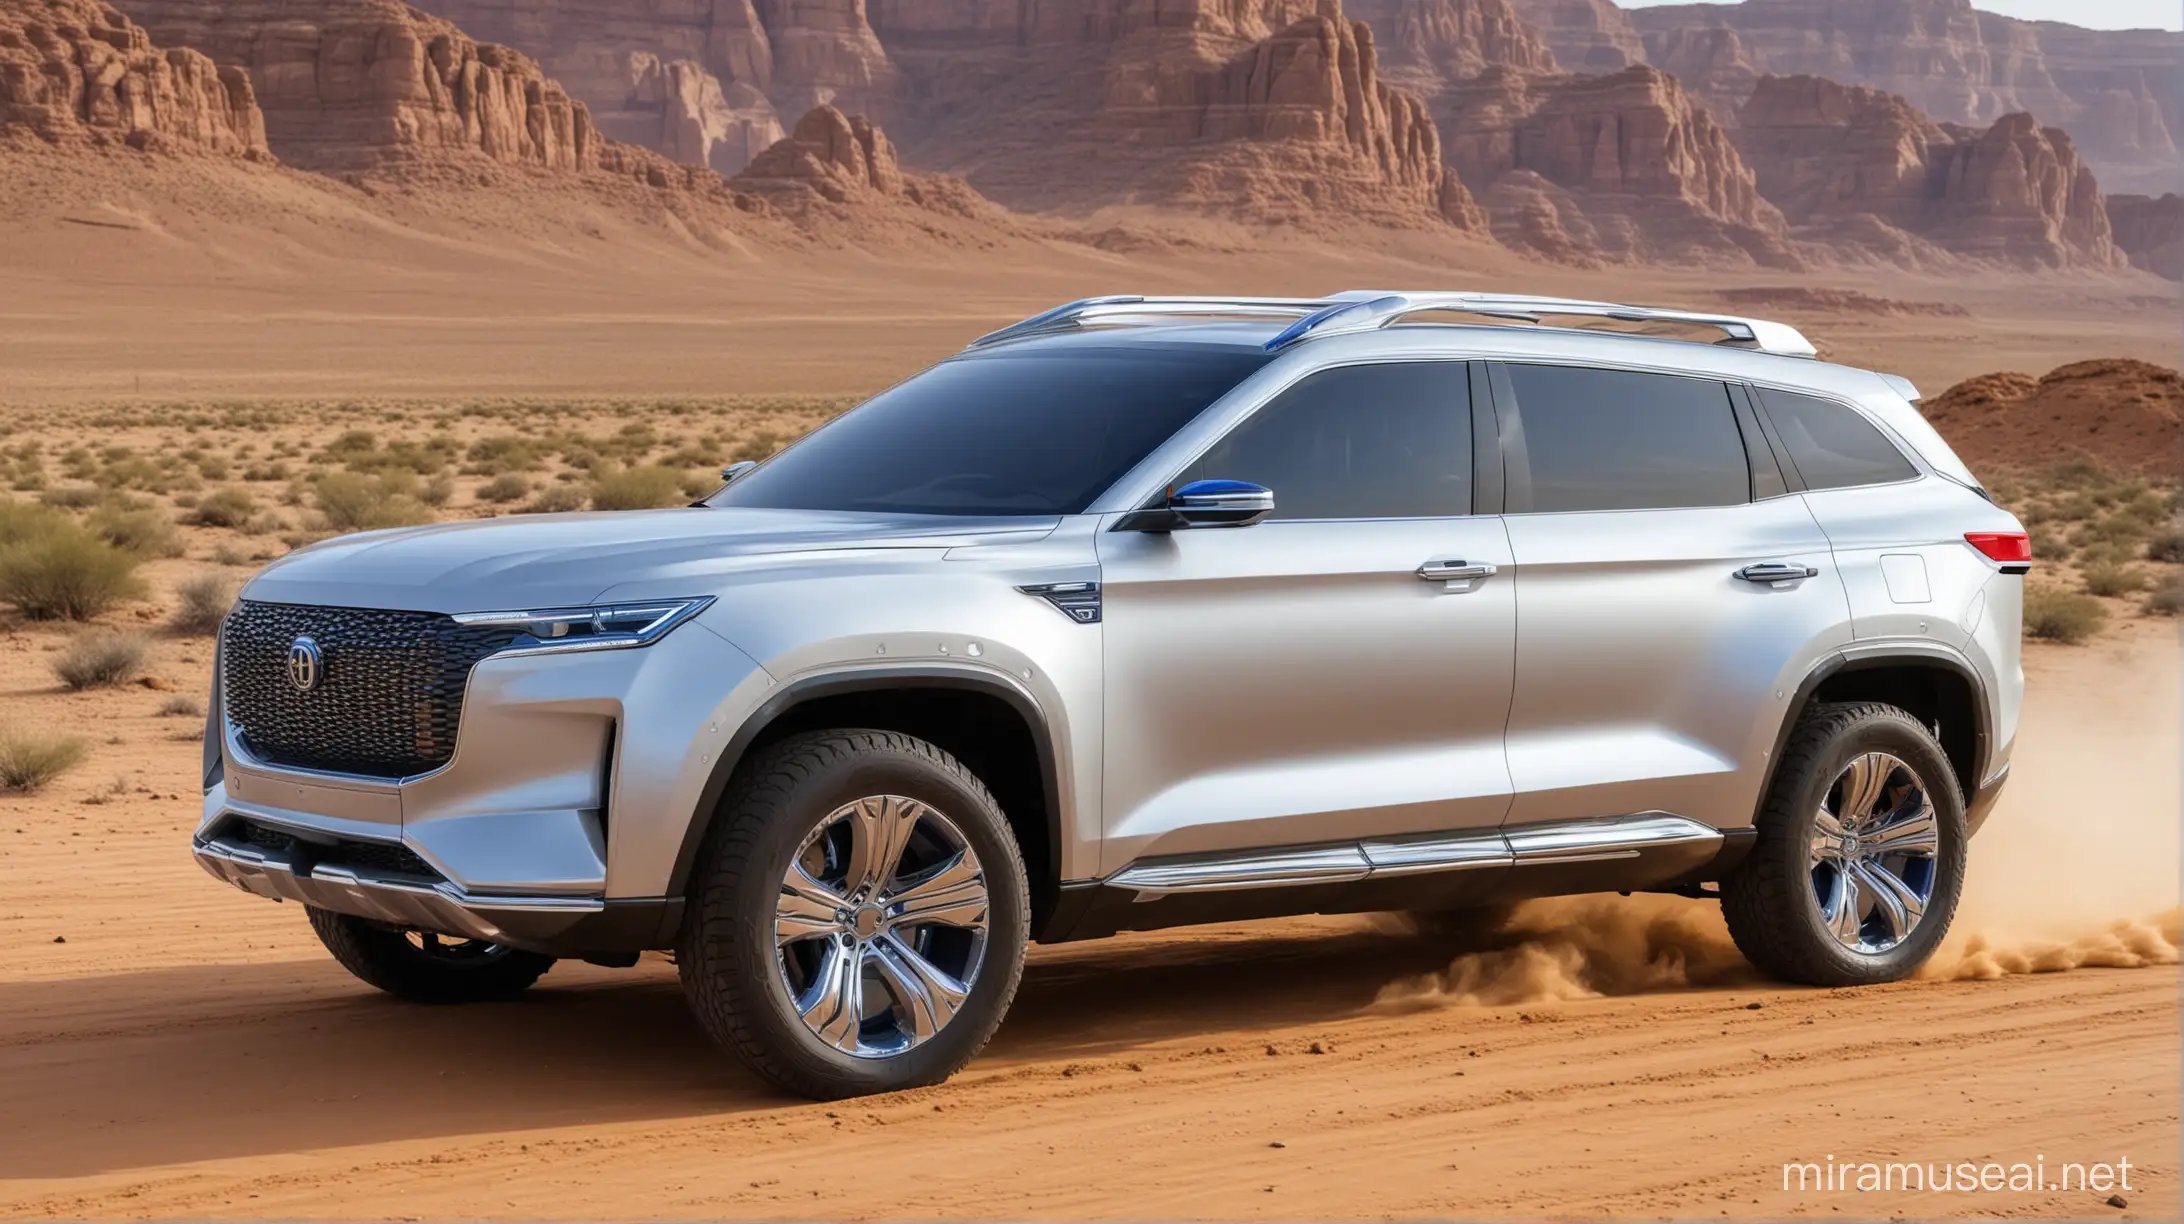 A silver and blue concept full size suv car designed by the IKCO,  this suv is designed in style of IKCO DENA,  driving on the desert 